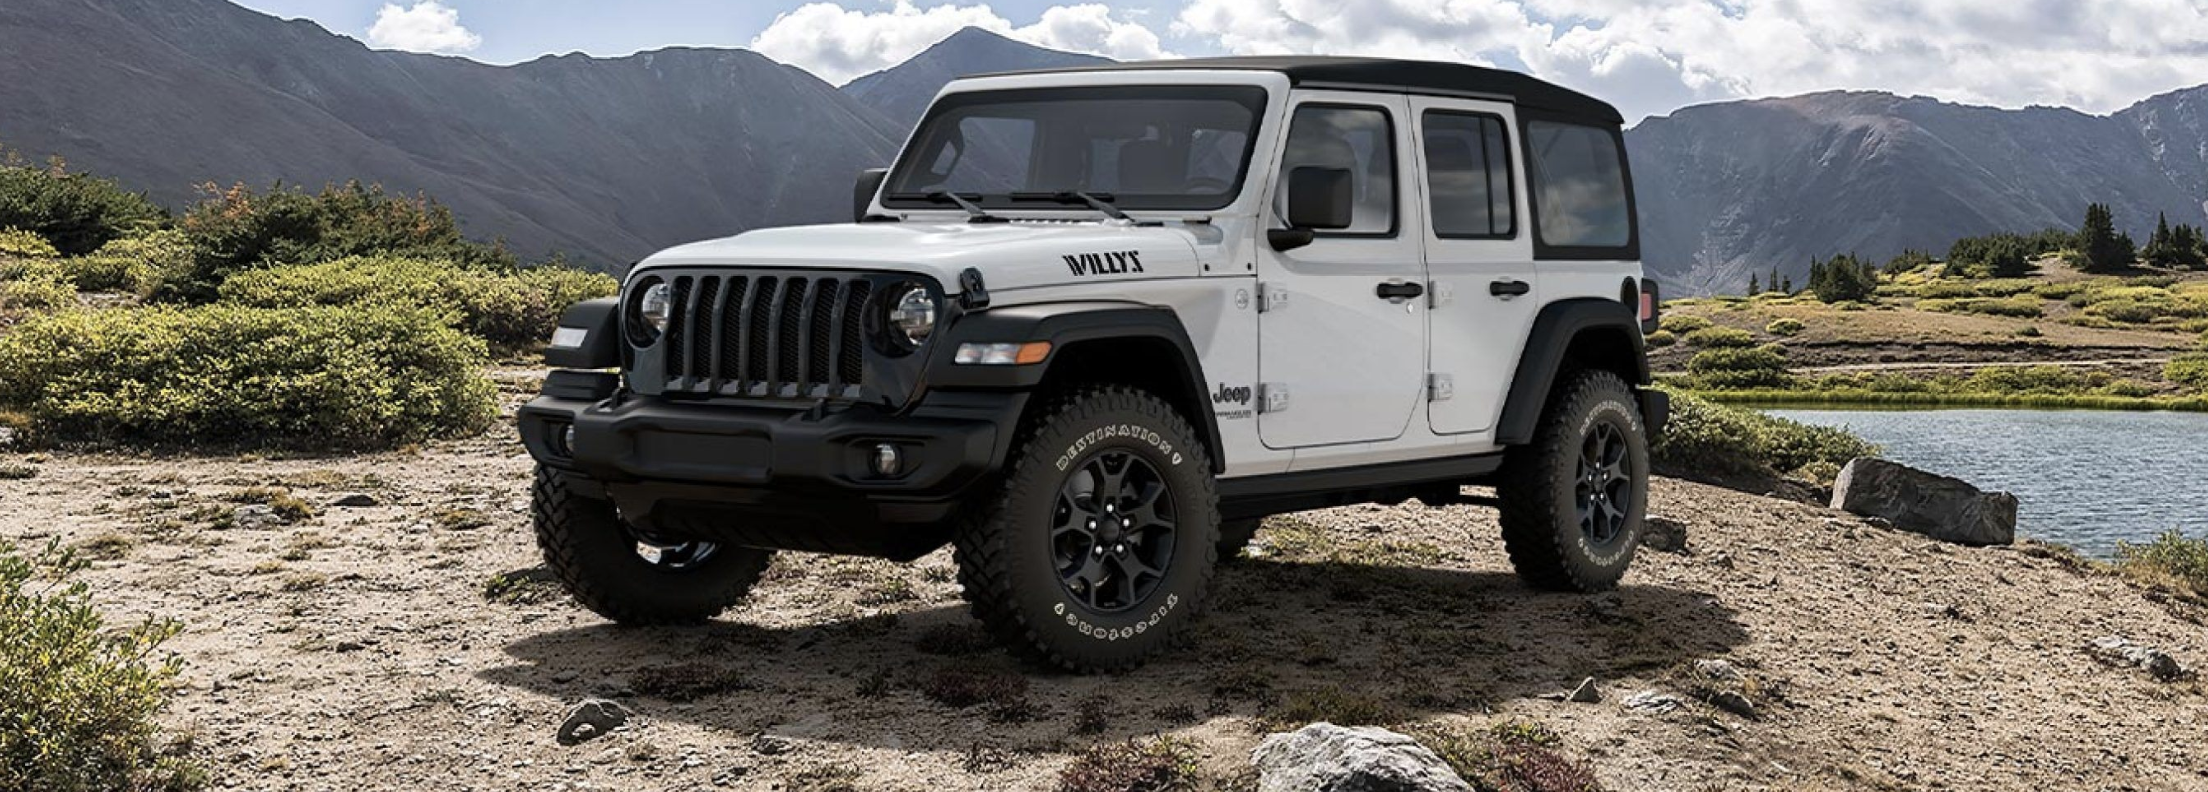 What Are The Benefits Of Owning A Jeep? | Capital CDJR of Indian Trail